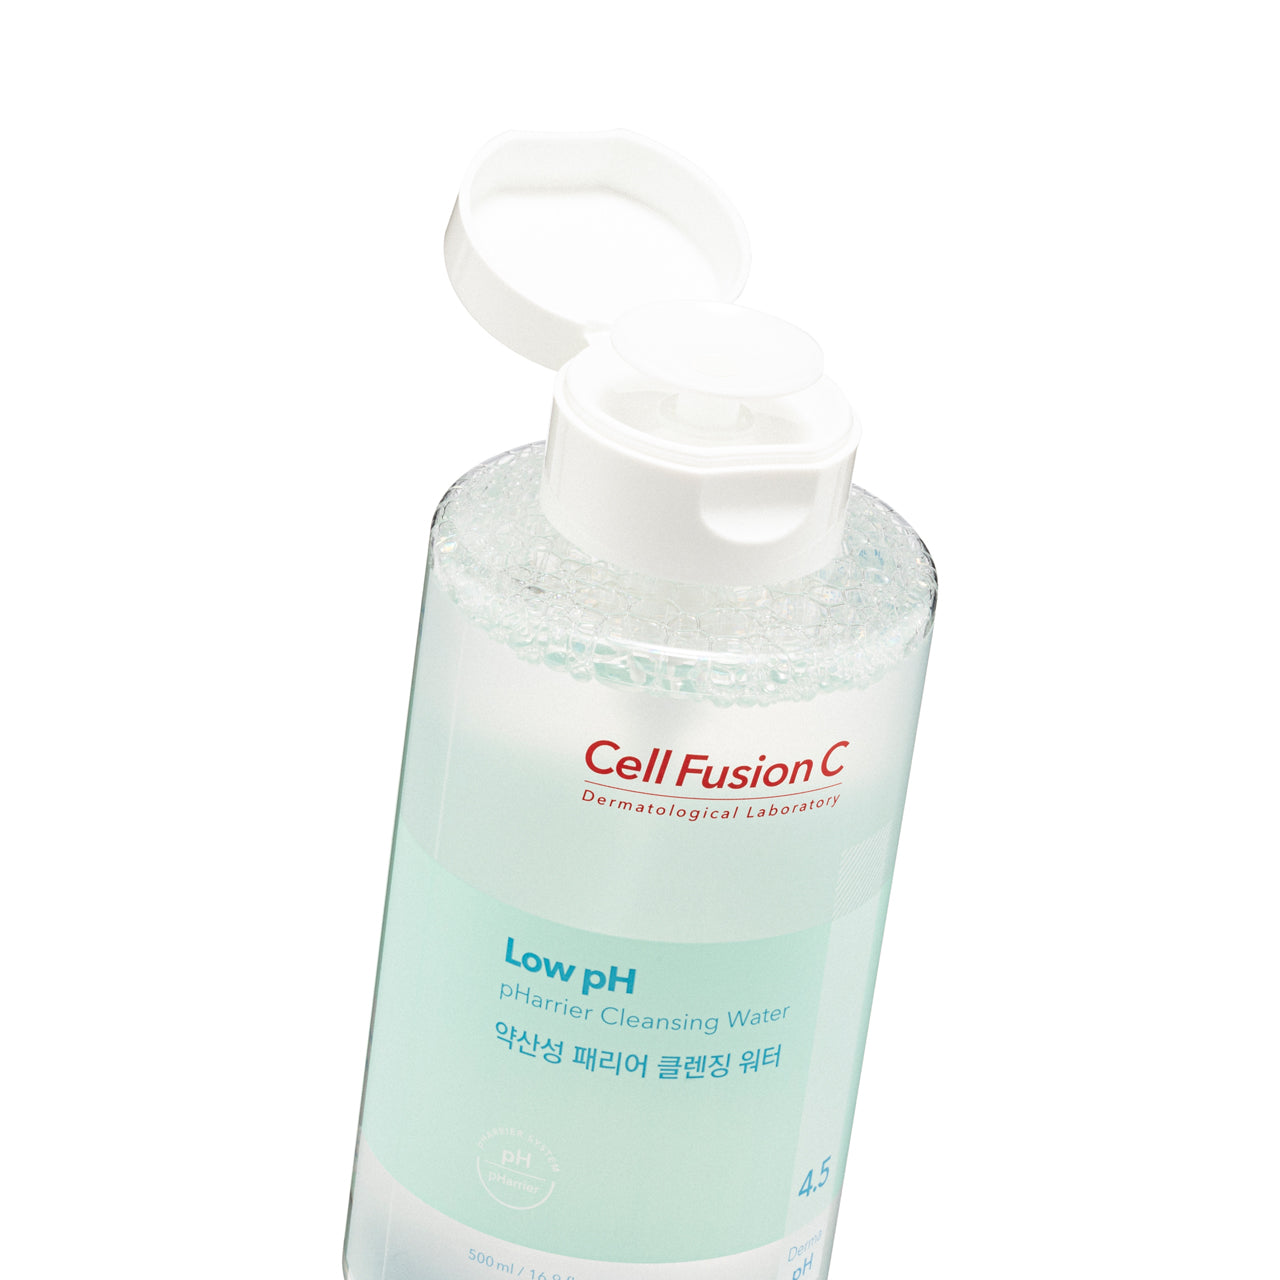 Cell Fusion C Low Ph Pharrier Cleansing Water 500ML | Sasa Global eShop